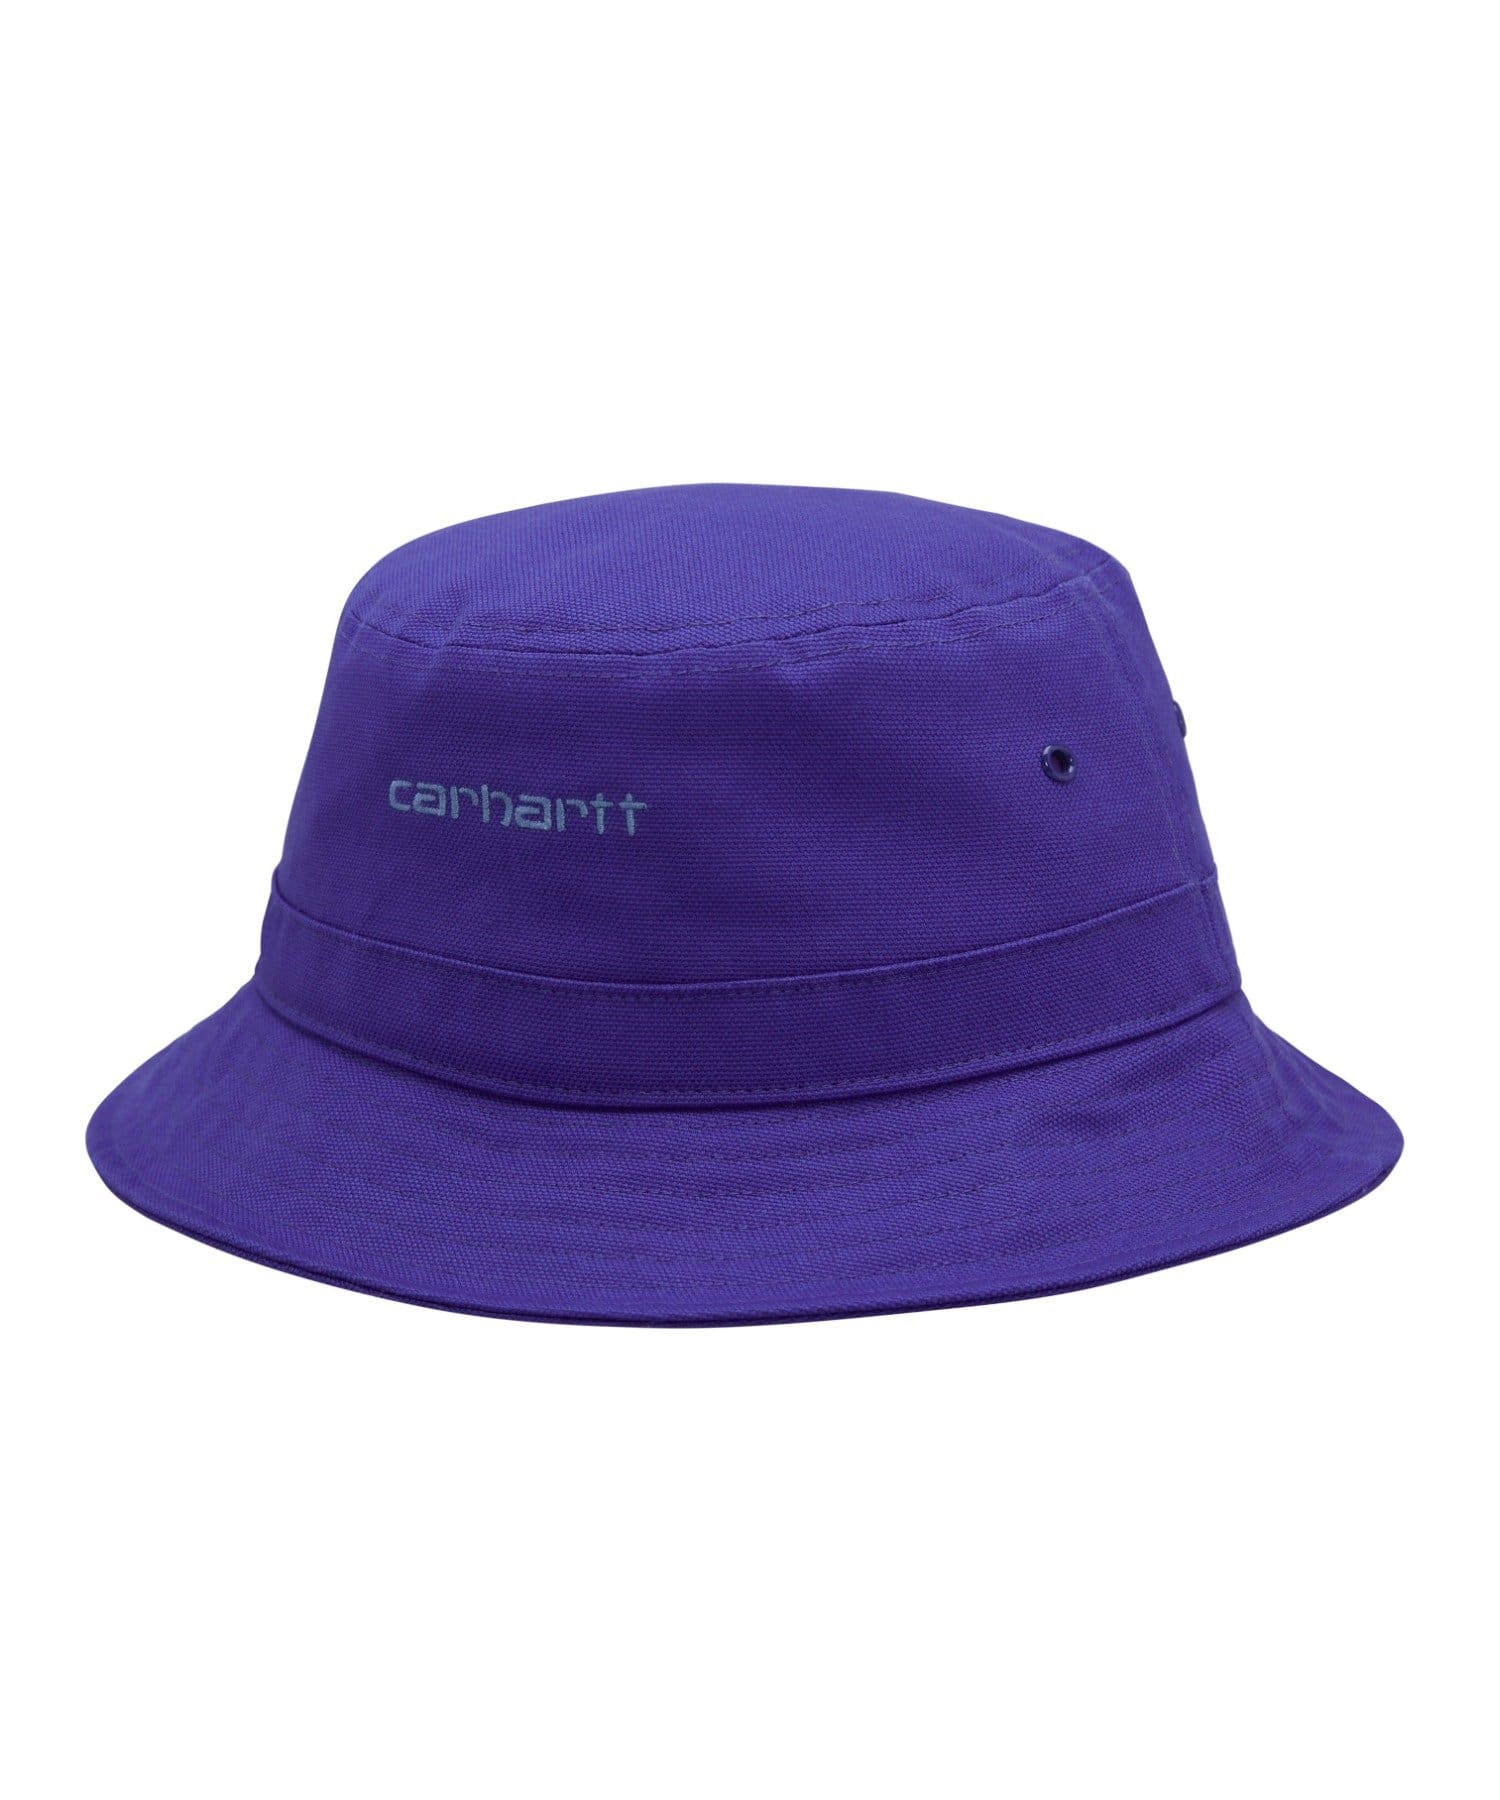 Carhartt】SCRIPT BUCKET HAT | WHO'S WHO gallery(フーズフー 